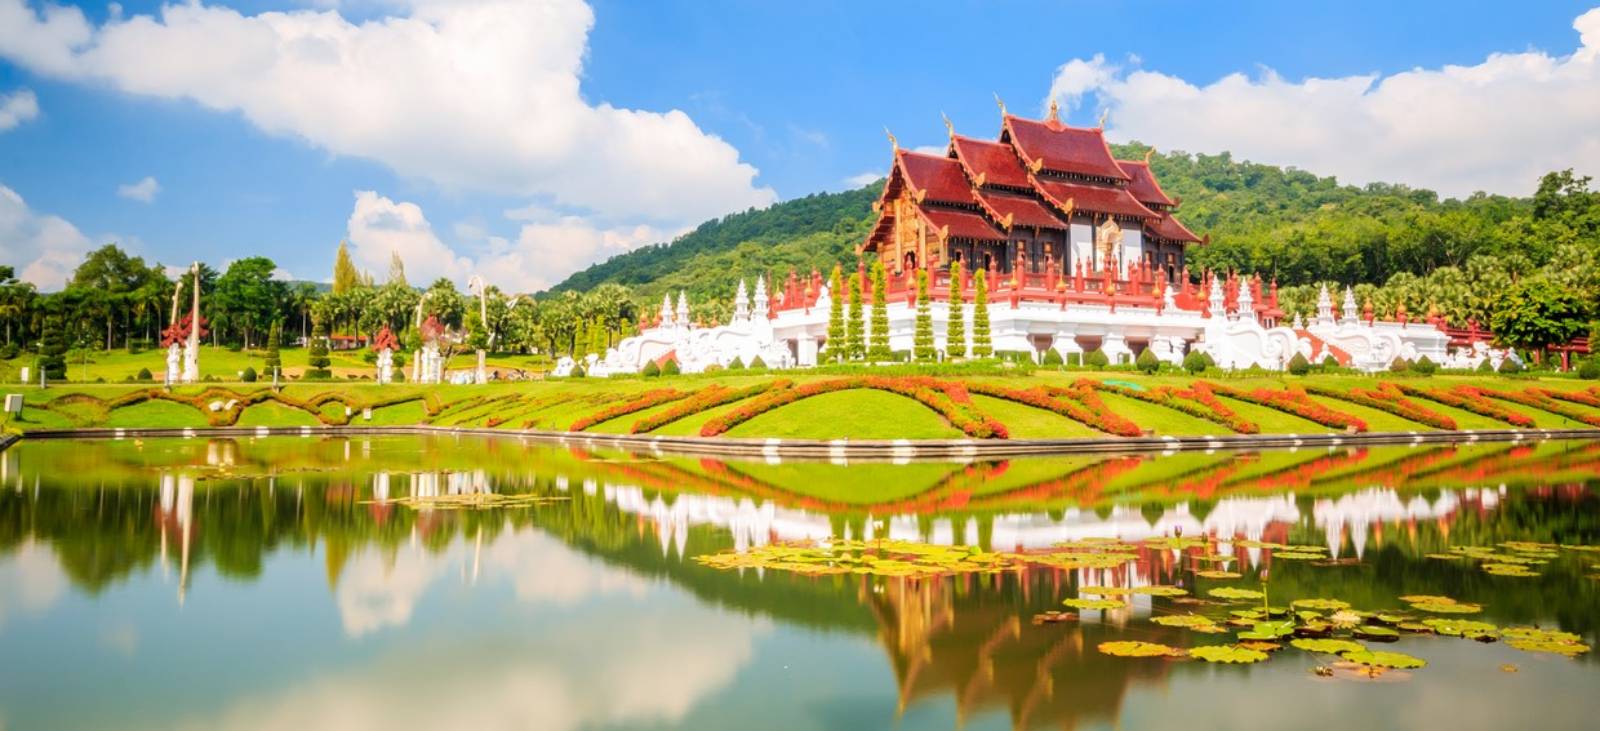 10 Best Things to Do in Chiang Mai